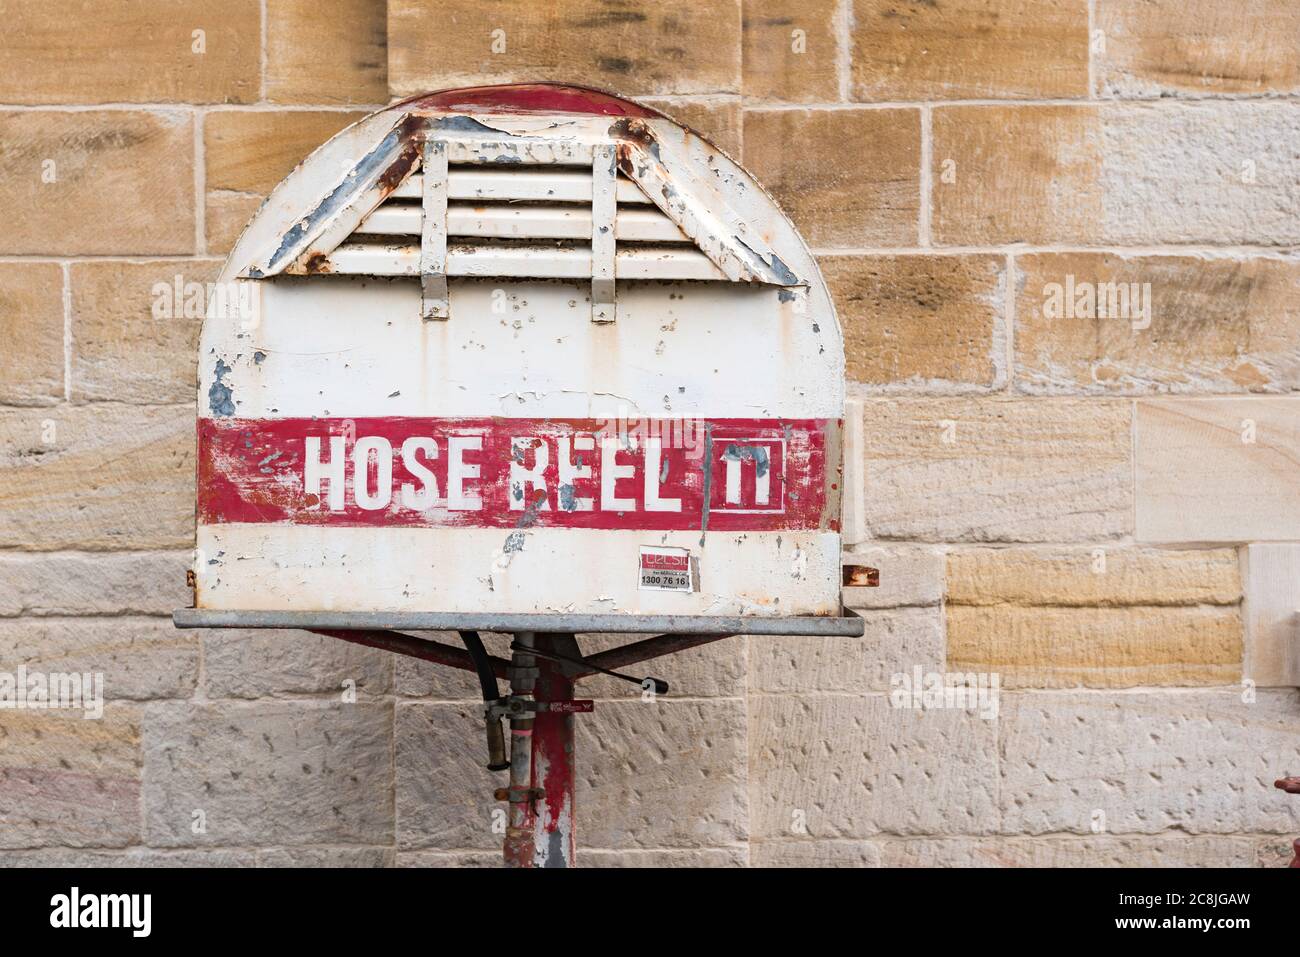 An old red and white painted fire hose reel standing in front of a sandstone wall on Cockatoo Island in Sydney Harbour, New South Wales, Australia Stock Photo